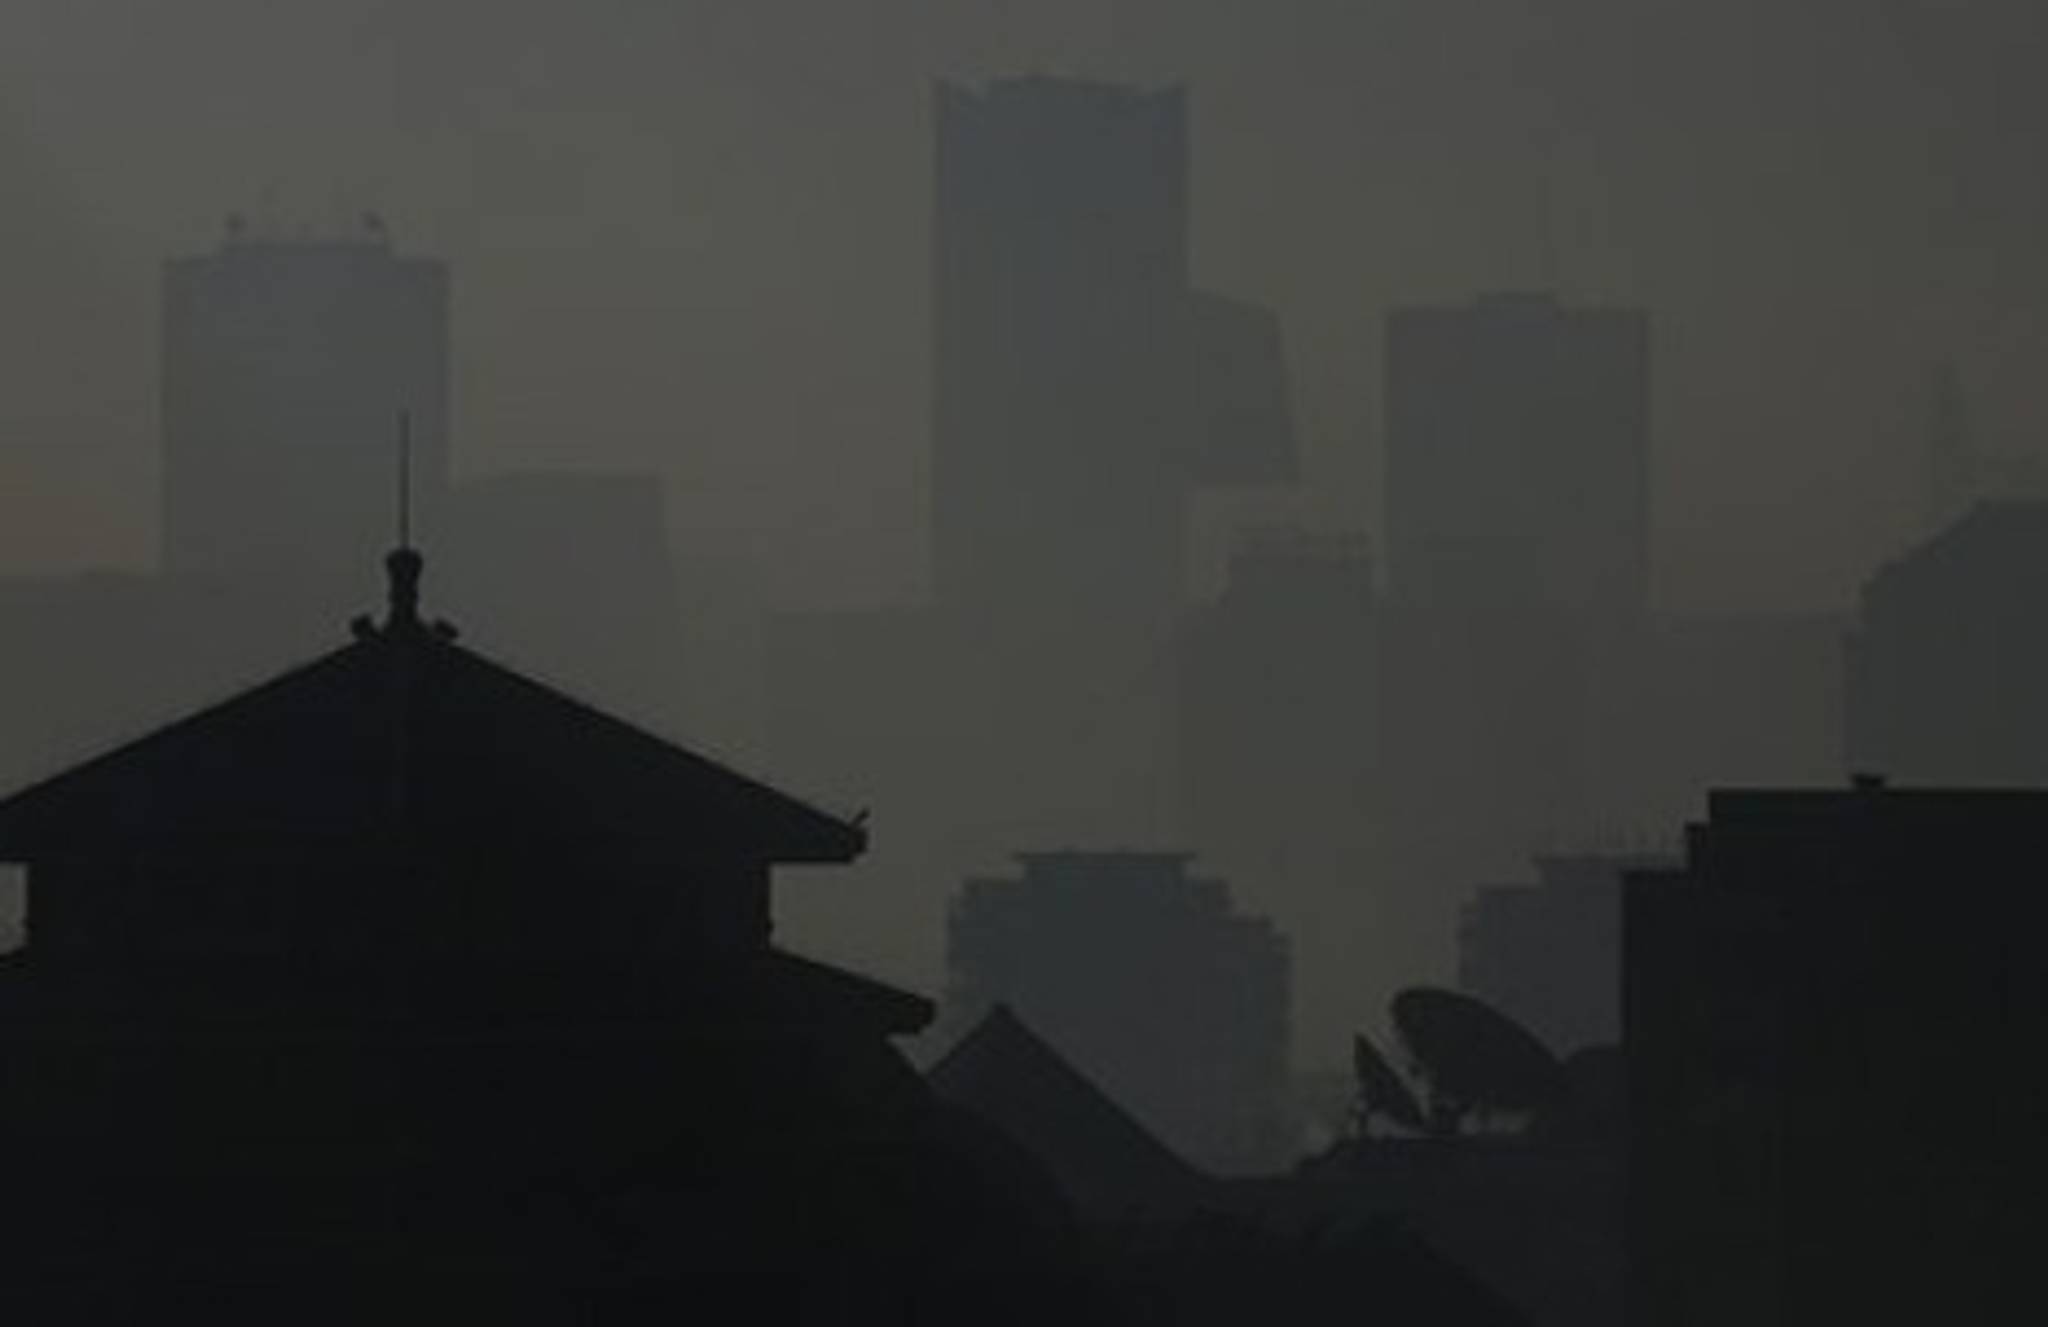 Chinese parents fear pollution